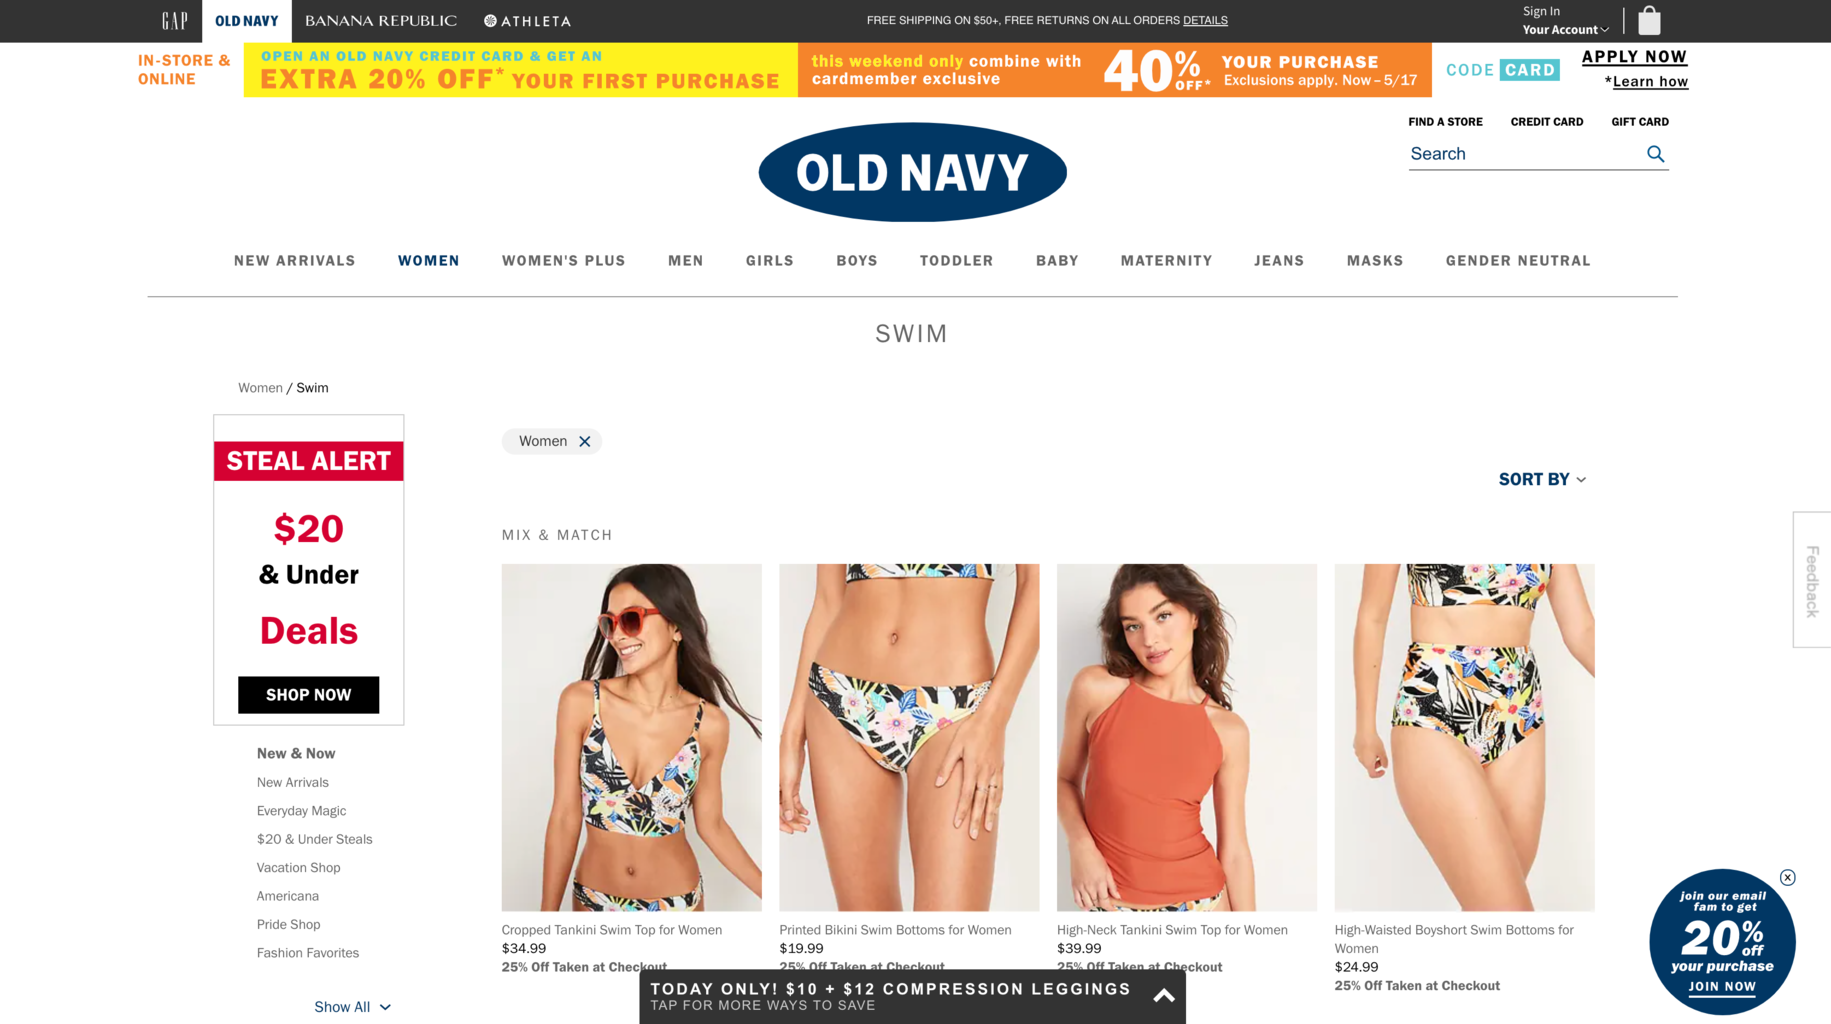 Photo from Old Navy